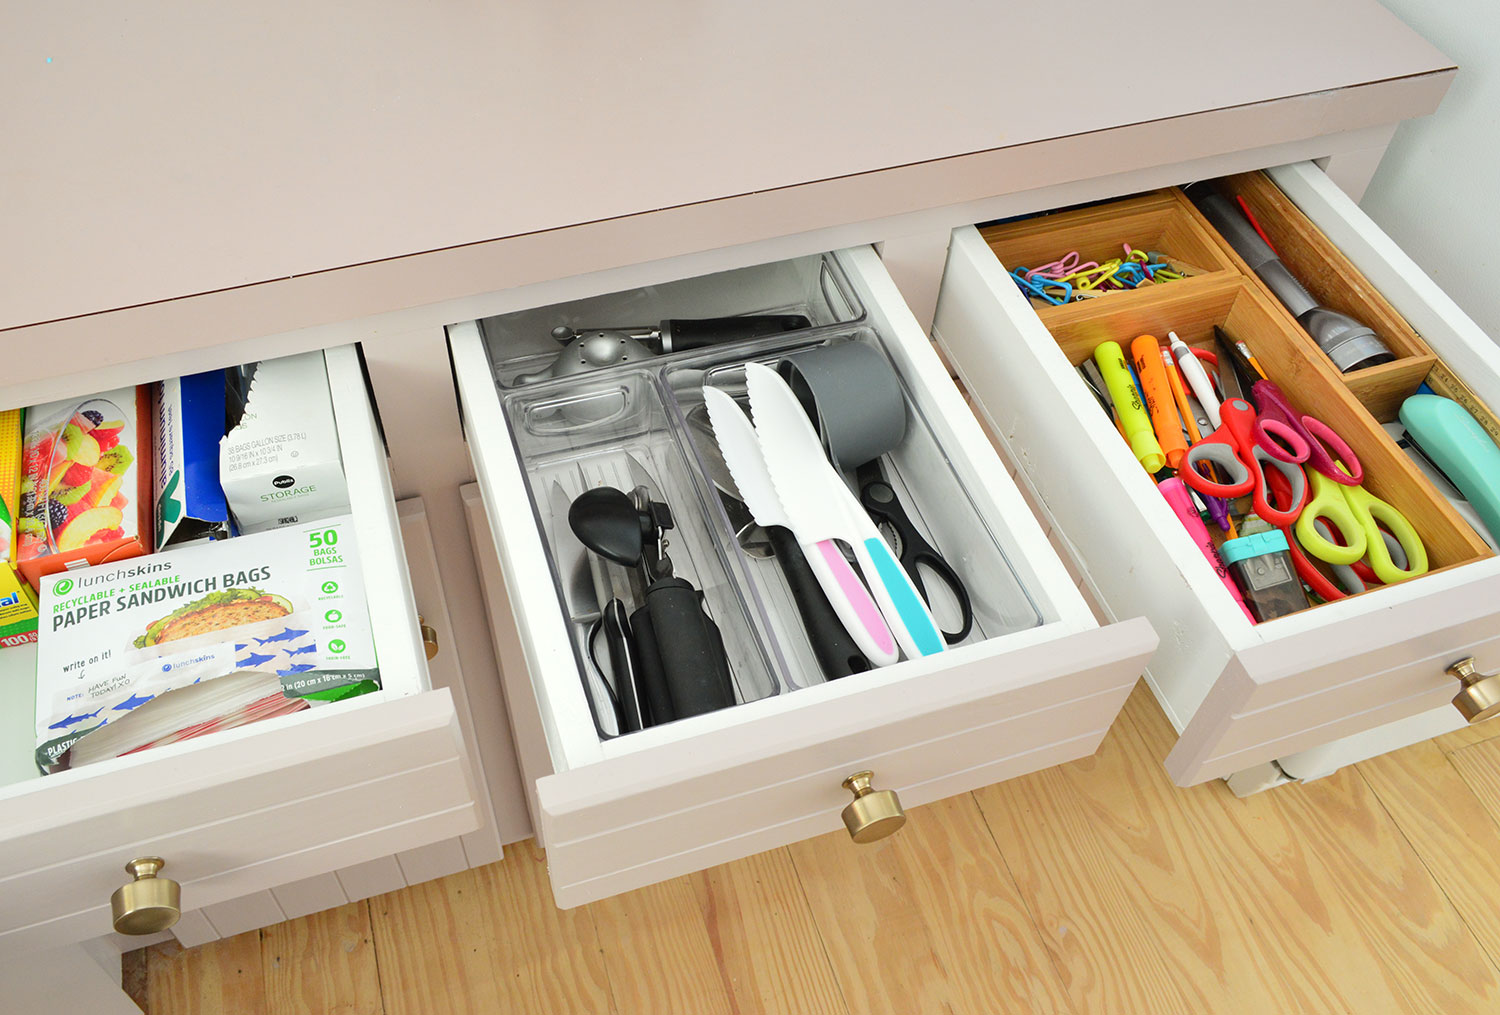 Kitchen Drawers & Shelves – Keep Your Cabinets Organized - IKEA